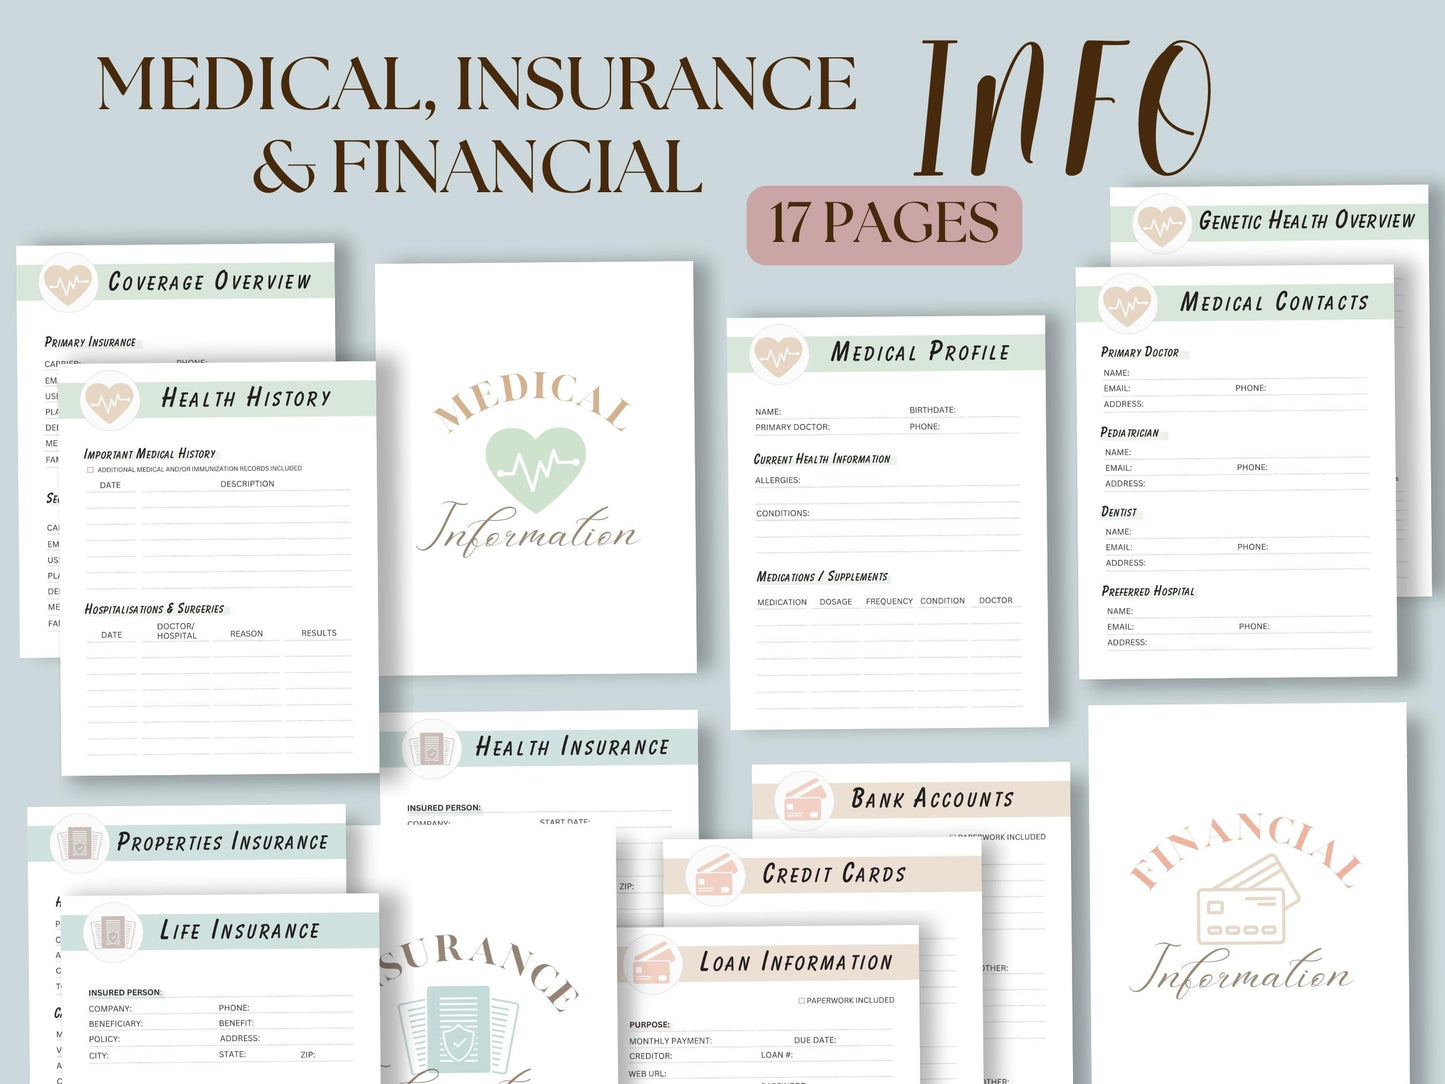 Medical, Insurance, Financial info. Example pages of Emergency planner.